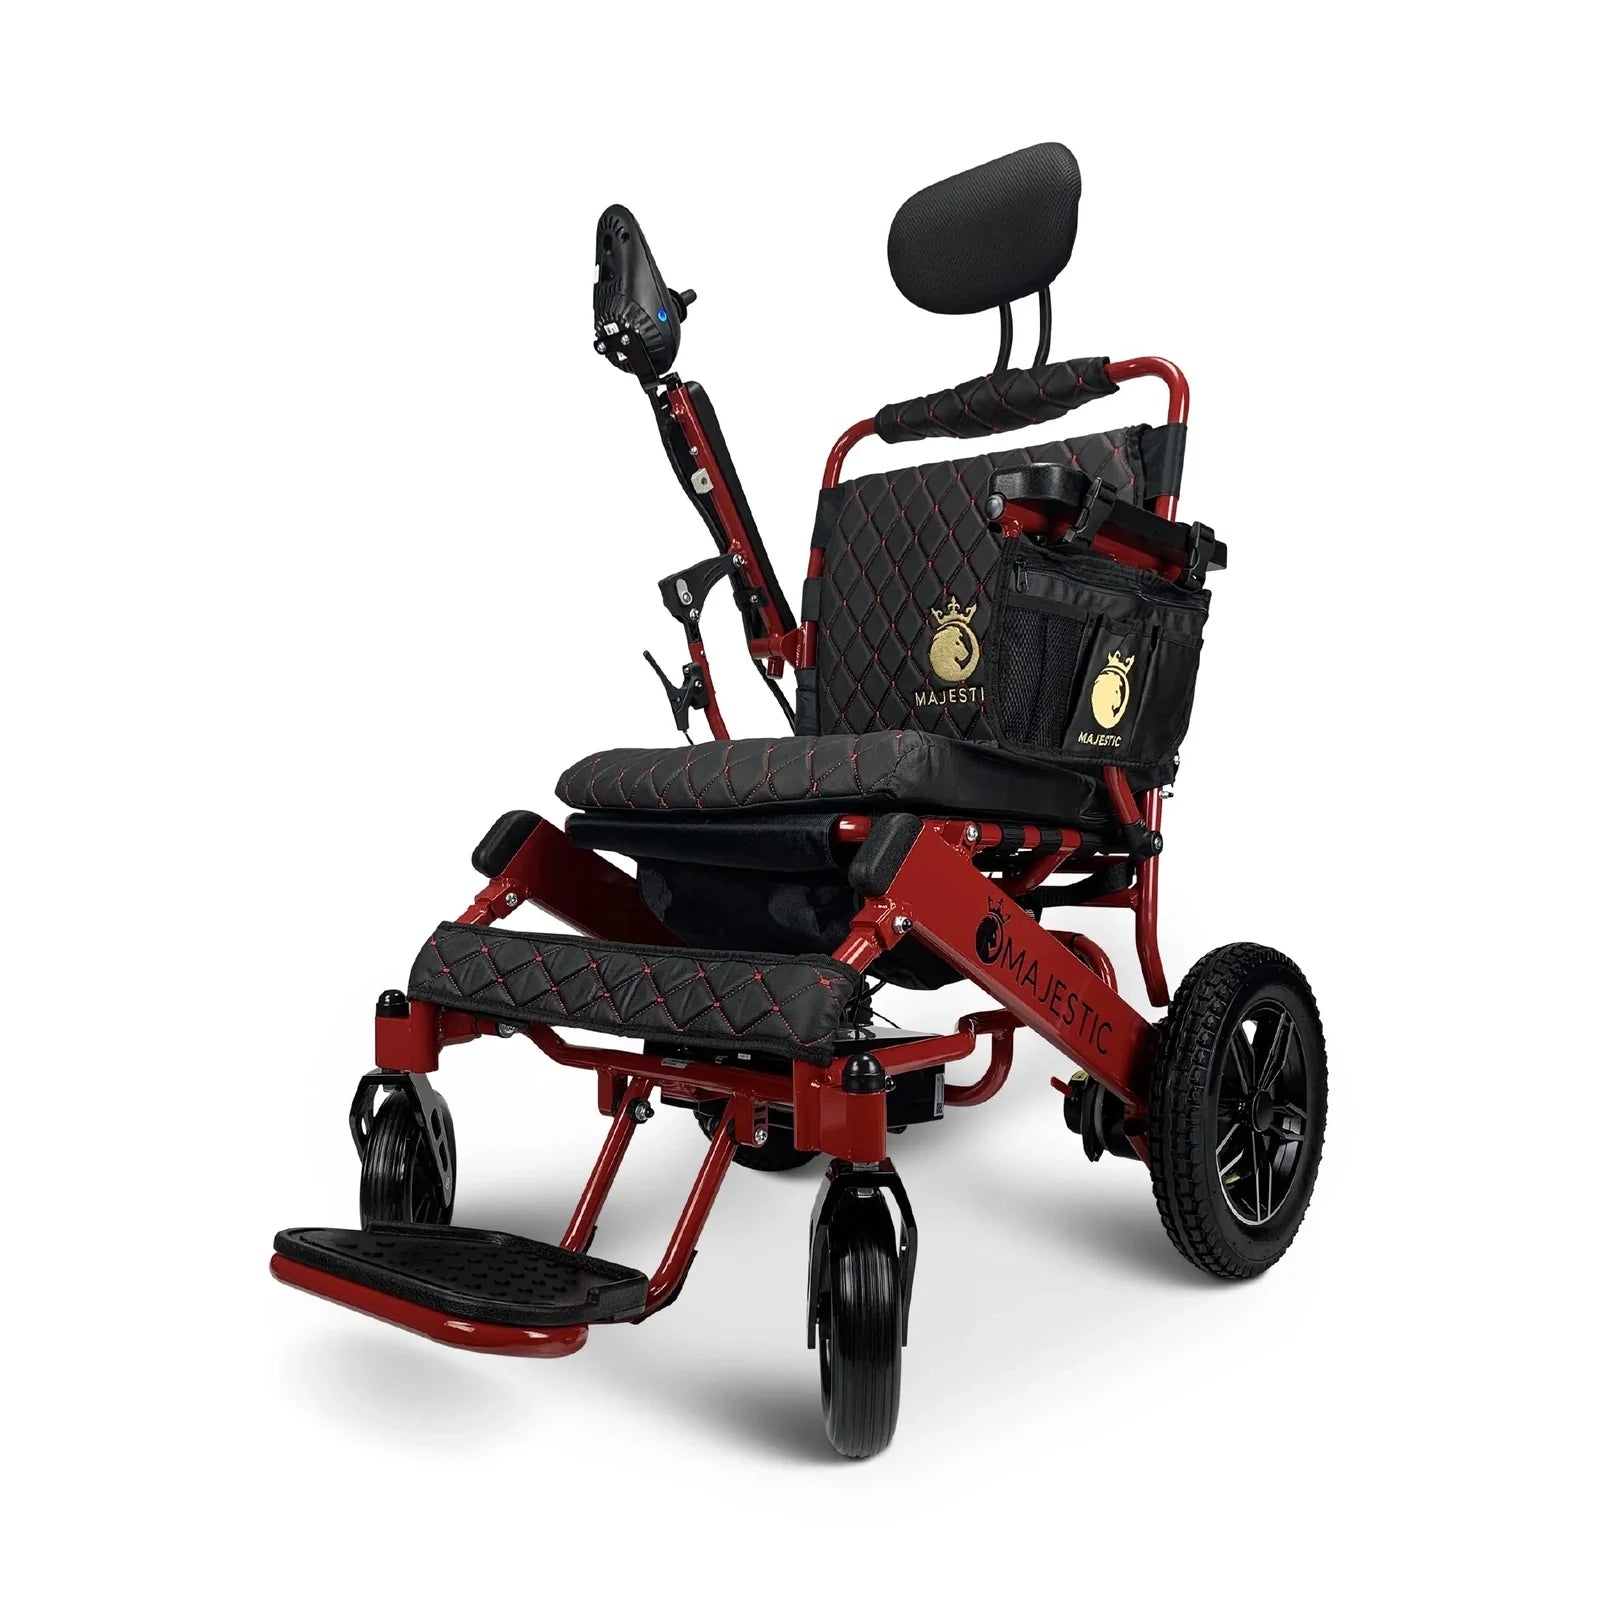 ComfyGO Majestic IQ-8000 Remote Controlled Lightweight Folding Electric Wheelchair Power Wheelchairs ComfyGO Red Black 10 Miles & 17.5" Seat Width